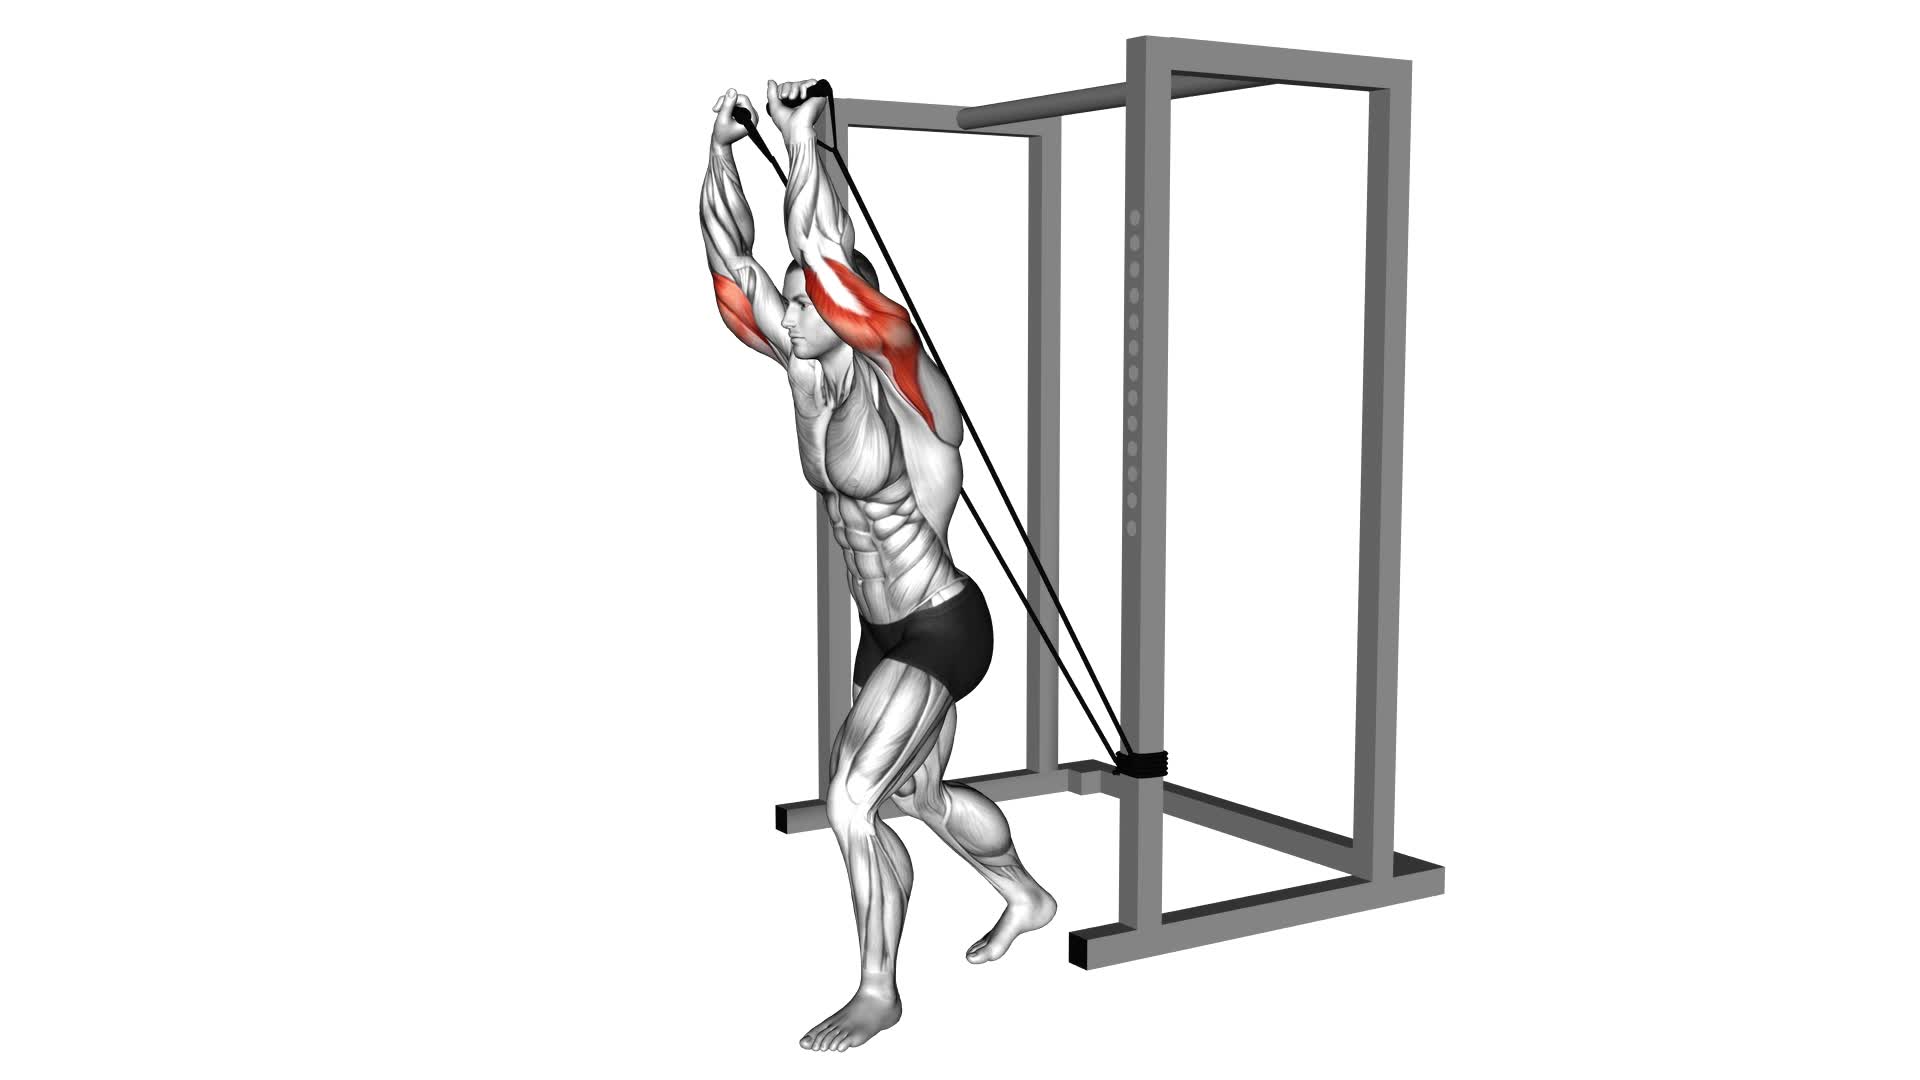 Band Overhead Triceps Extension (Male) - Video Exercise Guide & Tips